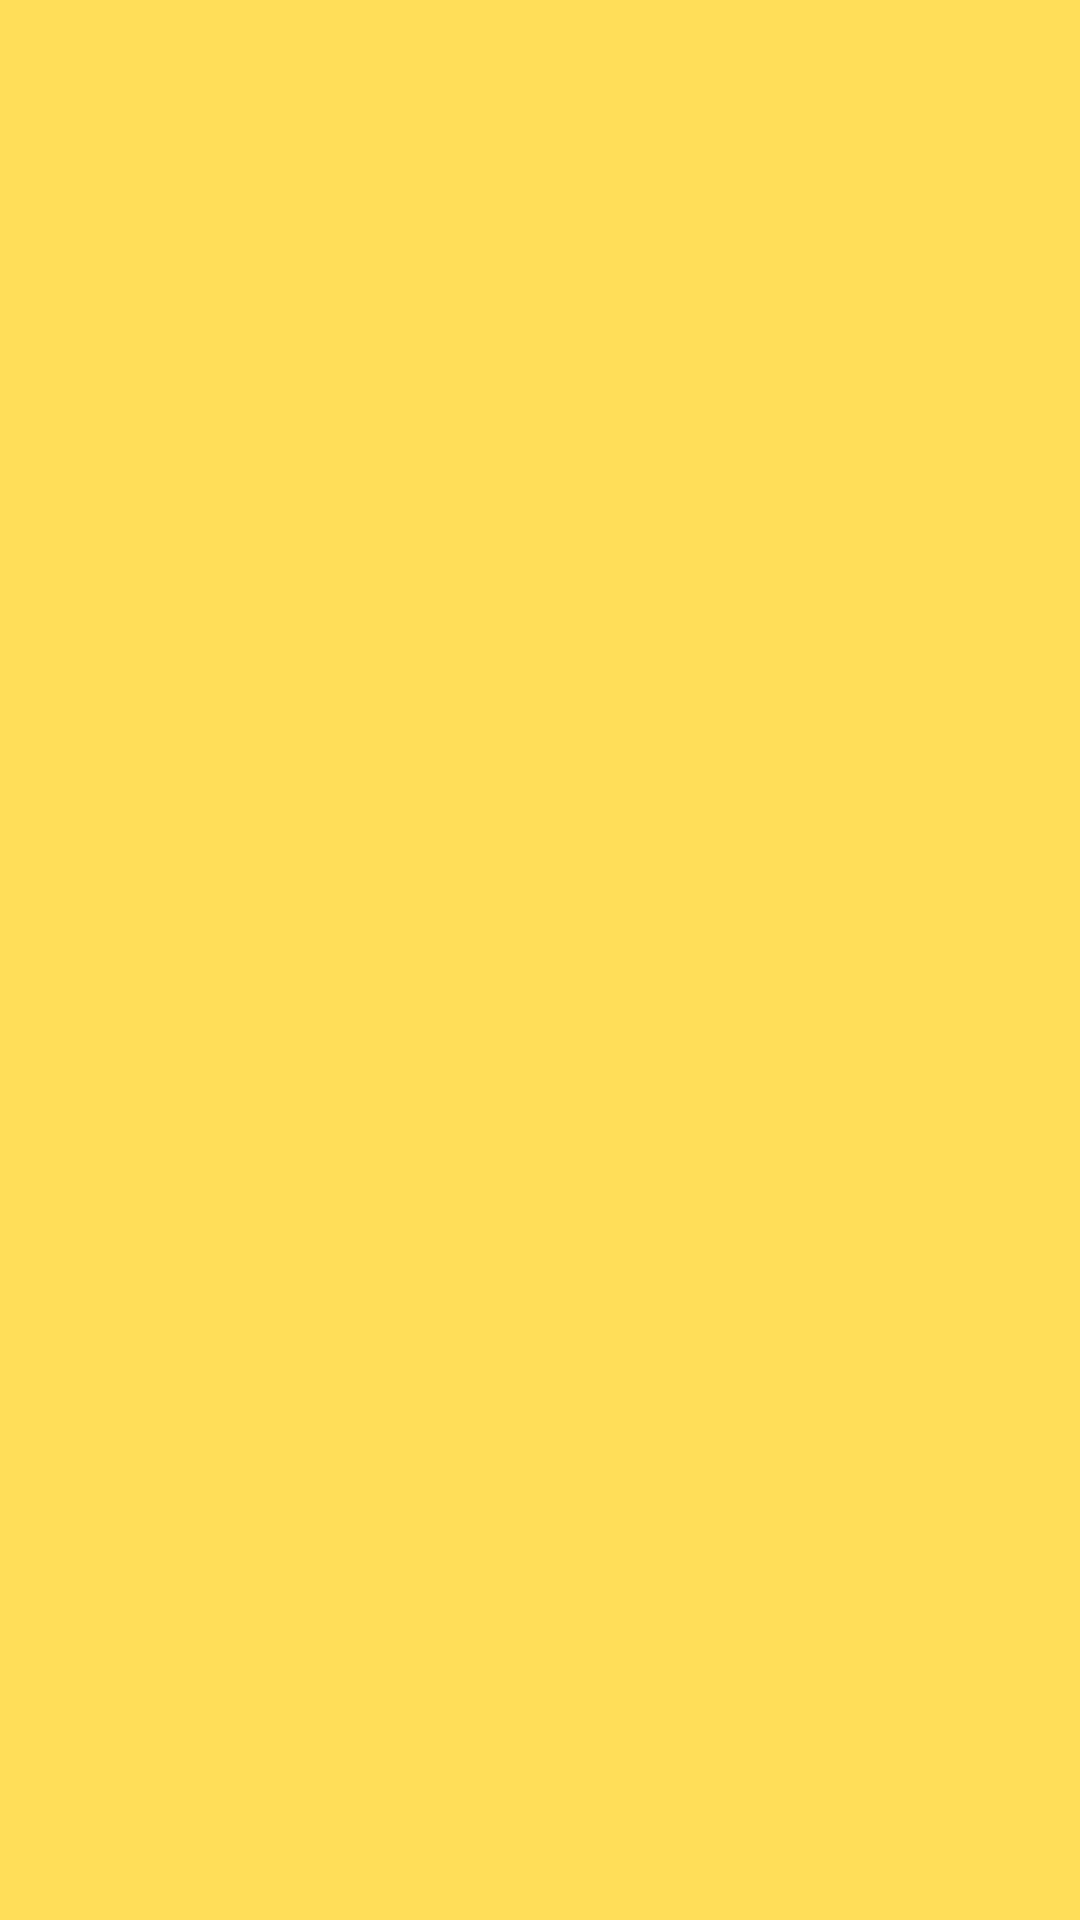 Yellow 3240X5760 Wallpaper and Background Image